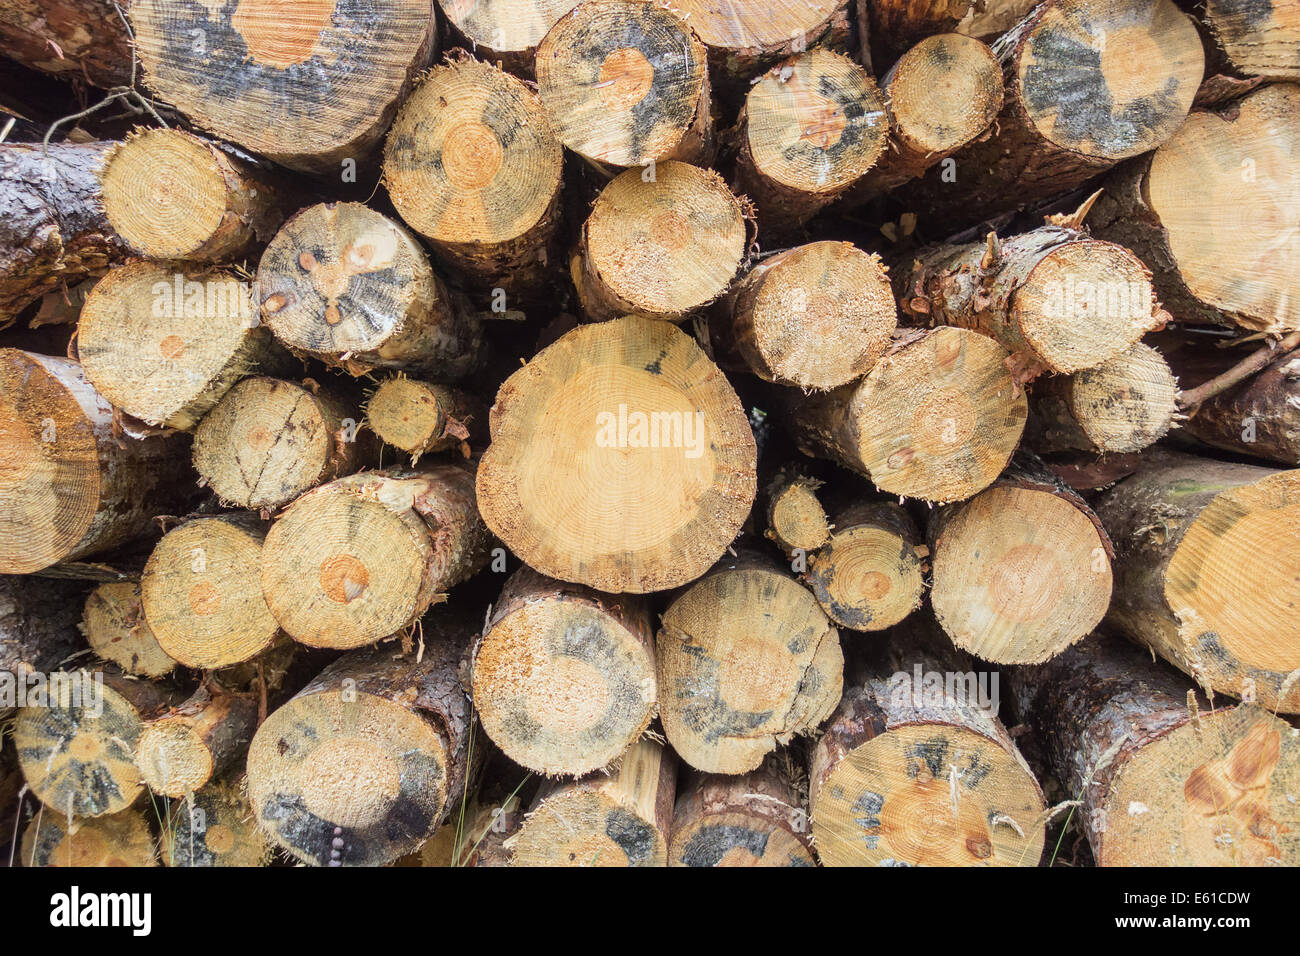 A stack of logs at the side of a track in Cliff Ridge Woods, North Yorkshire, England, GB.  These logs are likely to be chipped and used as biomass. Stock Photo